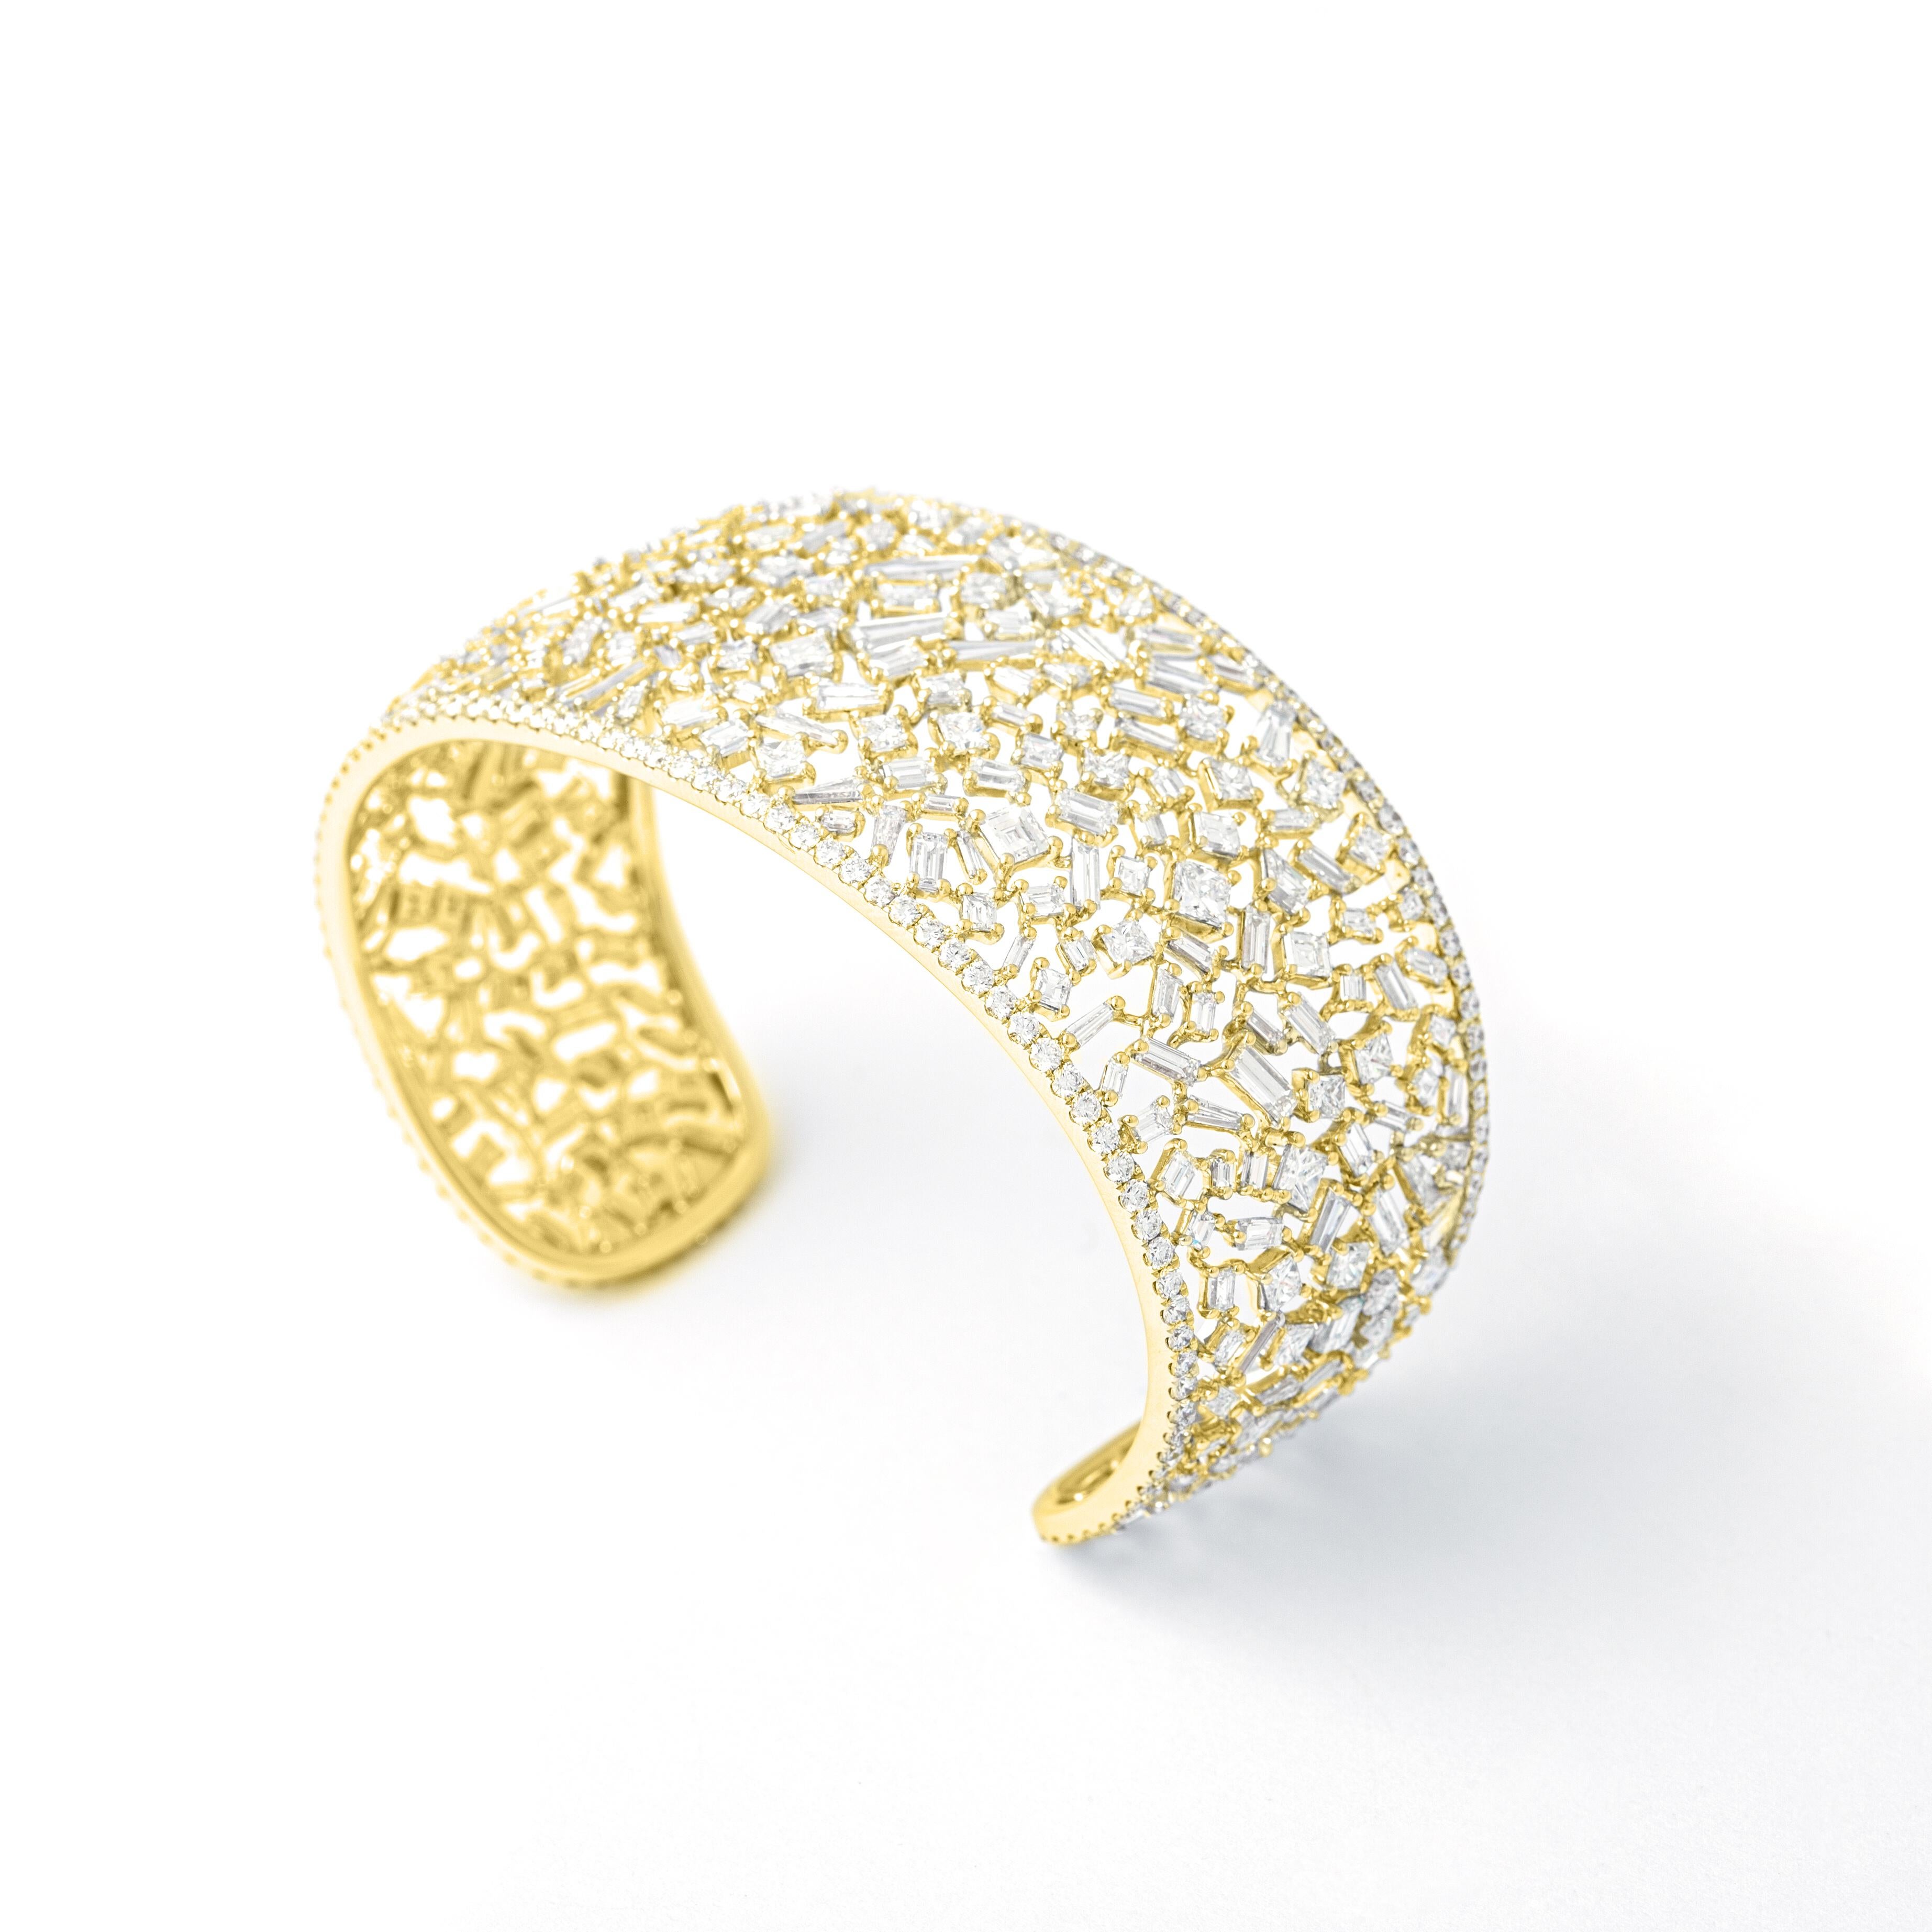 Bangle in 18kt yellow gold set with 277 diamonds baguette, princess, square and tapers 15.05 cts and 178 diamonds 2.96 cts.

Inner circumference: Approximately 15.7 centimeters (6.18 inches).

Total weight: 28.15 grams.

Width on the top: 3.00